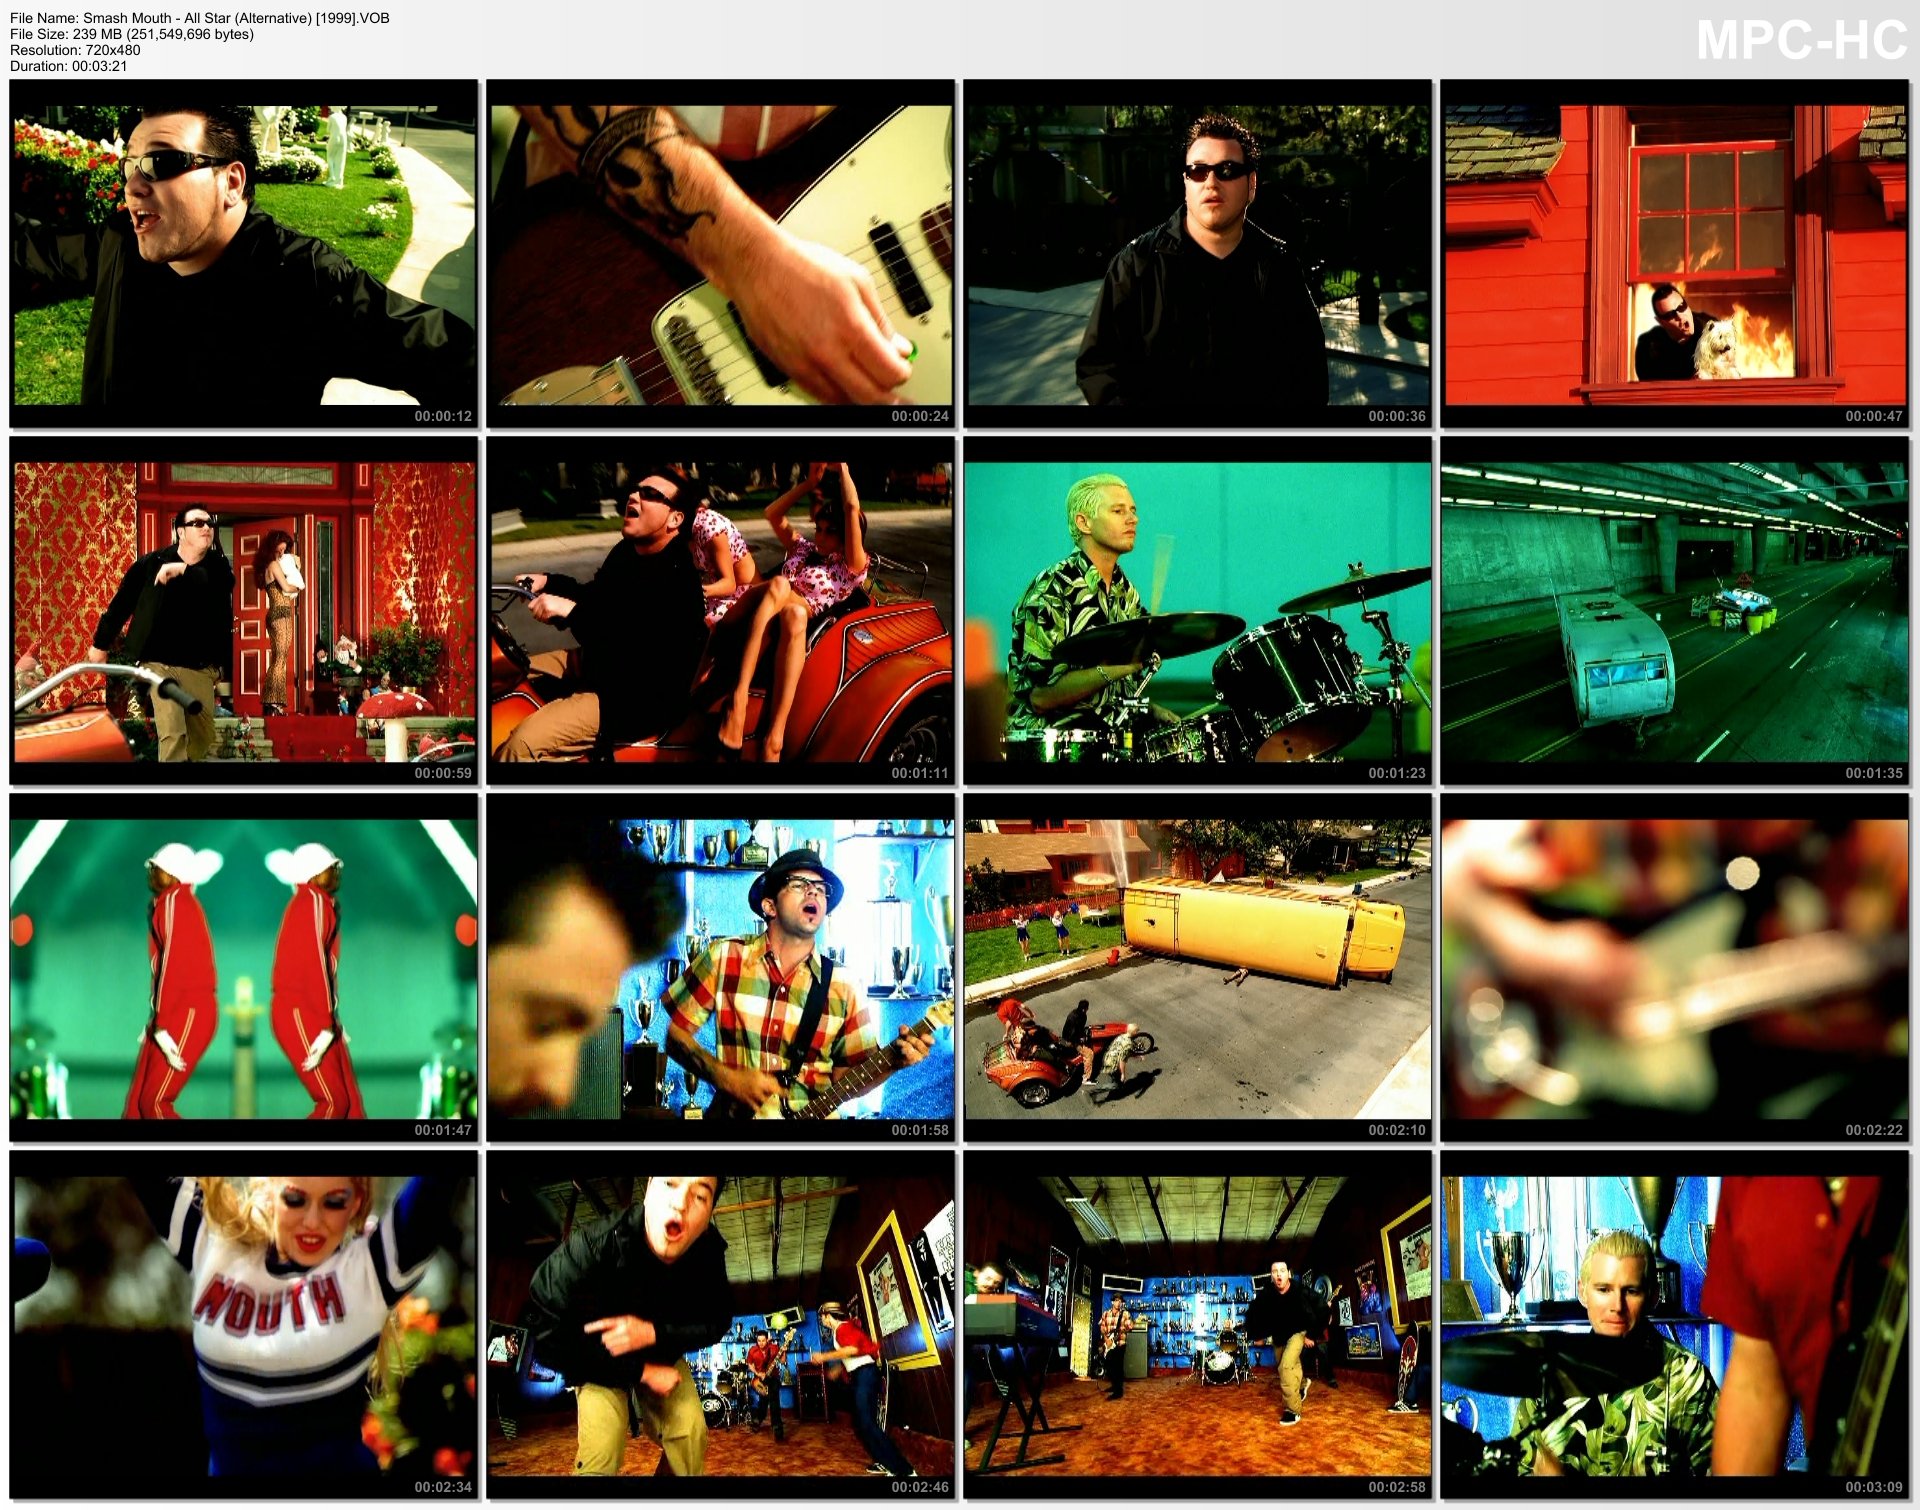 Smash Mouth - All Star (Official Music Video) - YouTube - wide 7